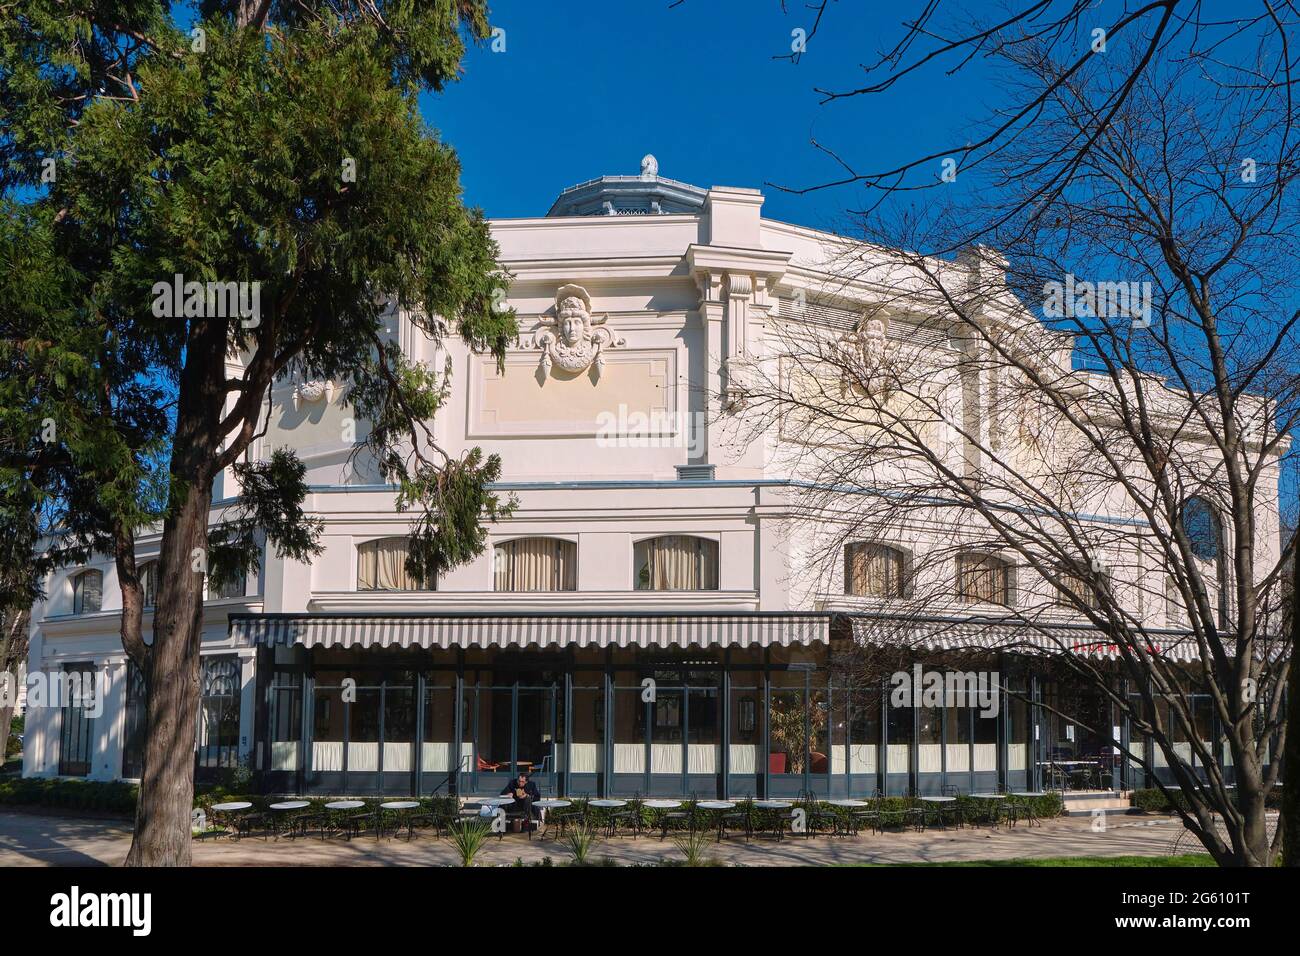 France, Paris, Champs Elysees gardens, the cafe of Marigny theater Stock Photo